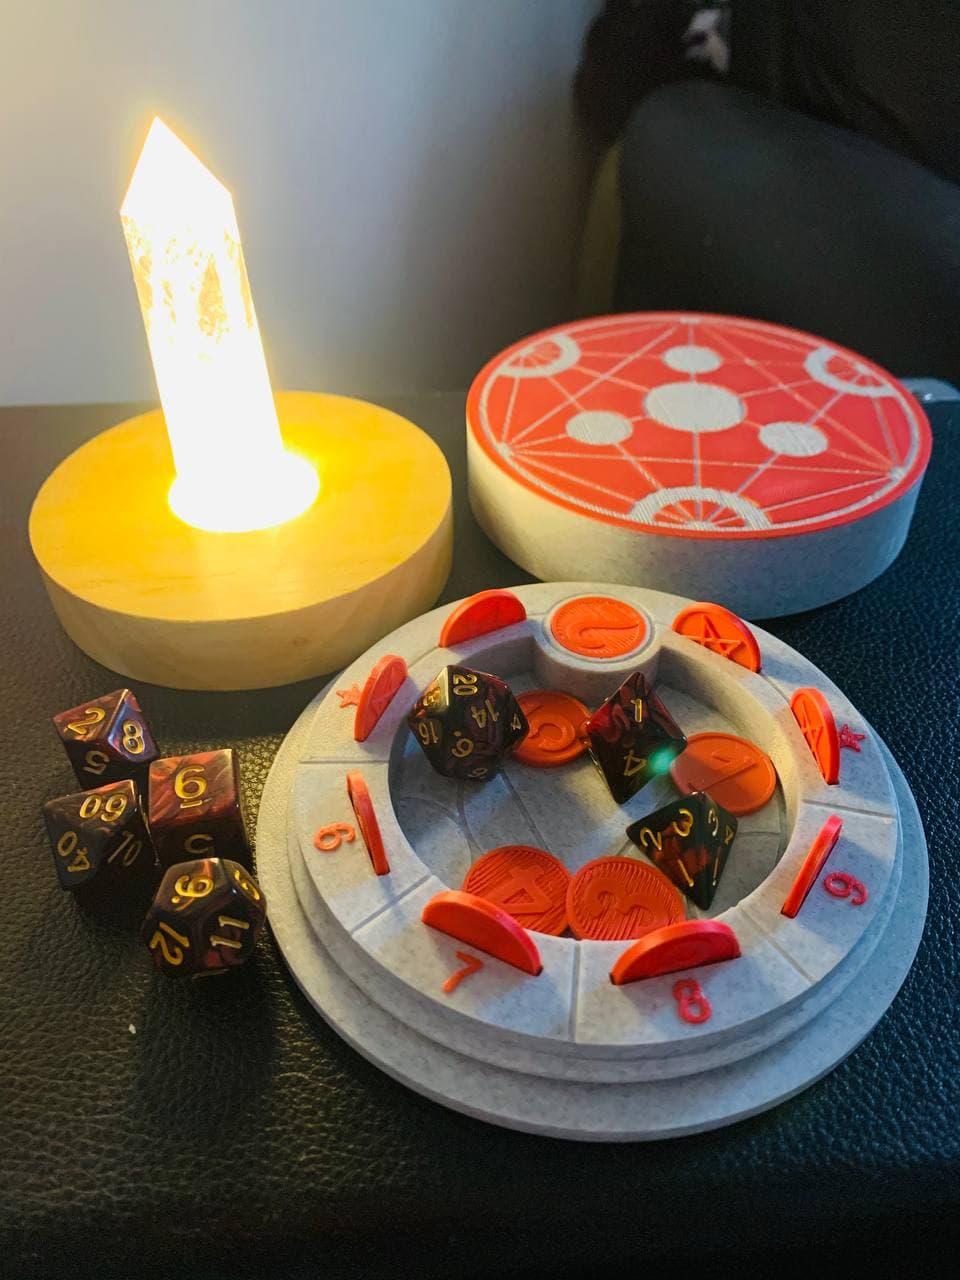 D&D 5e Spell Slot Tracker and Dice Vaults - Class Specific